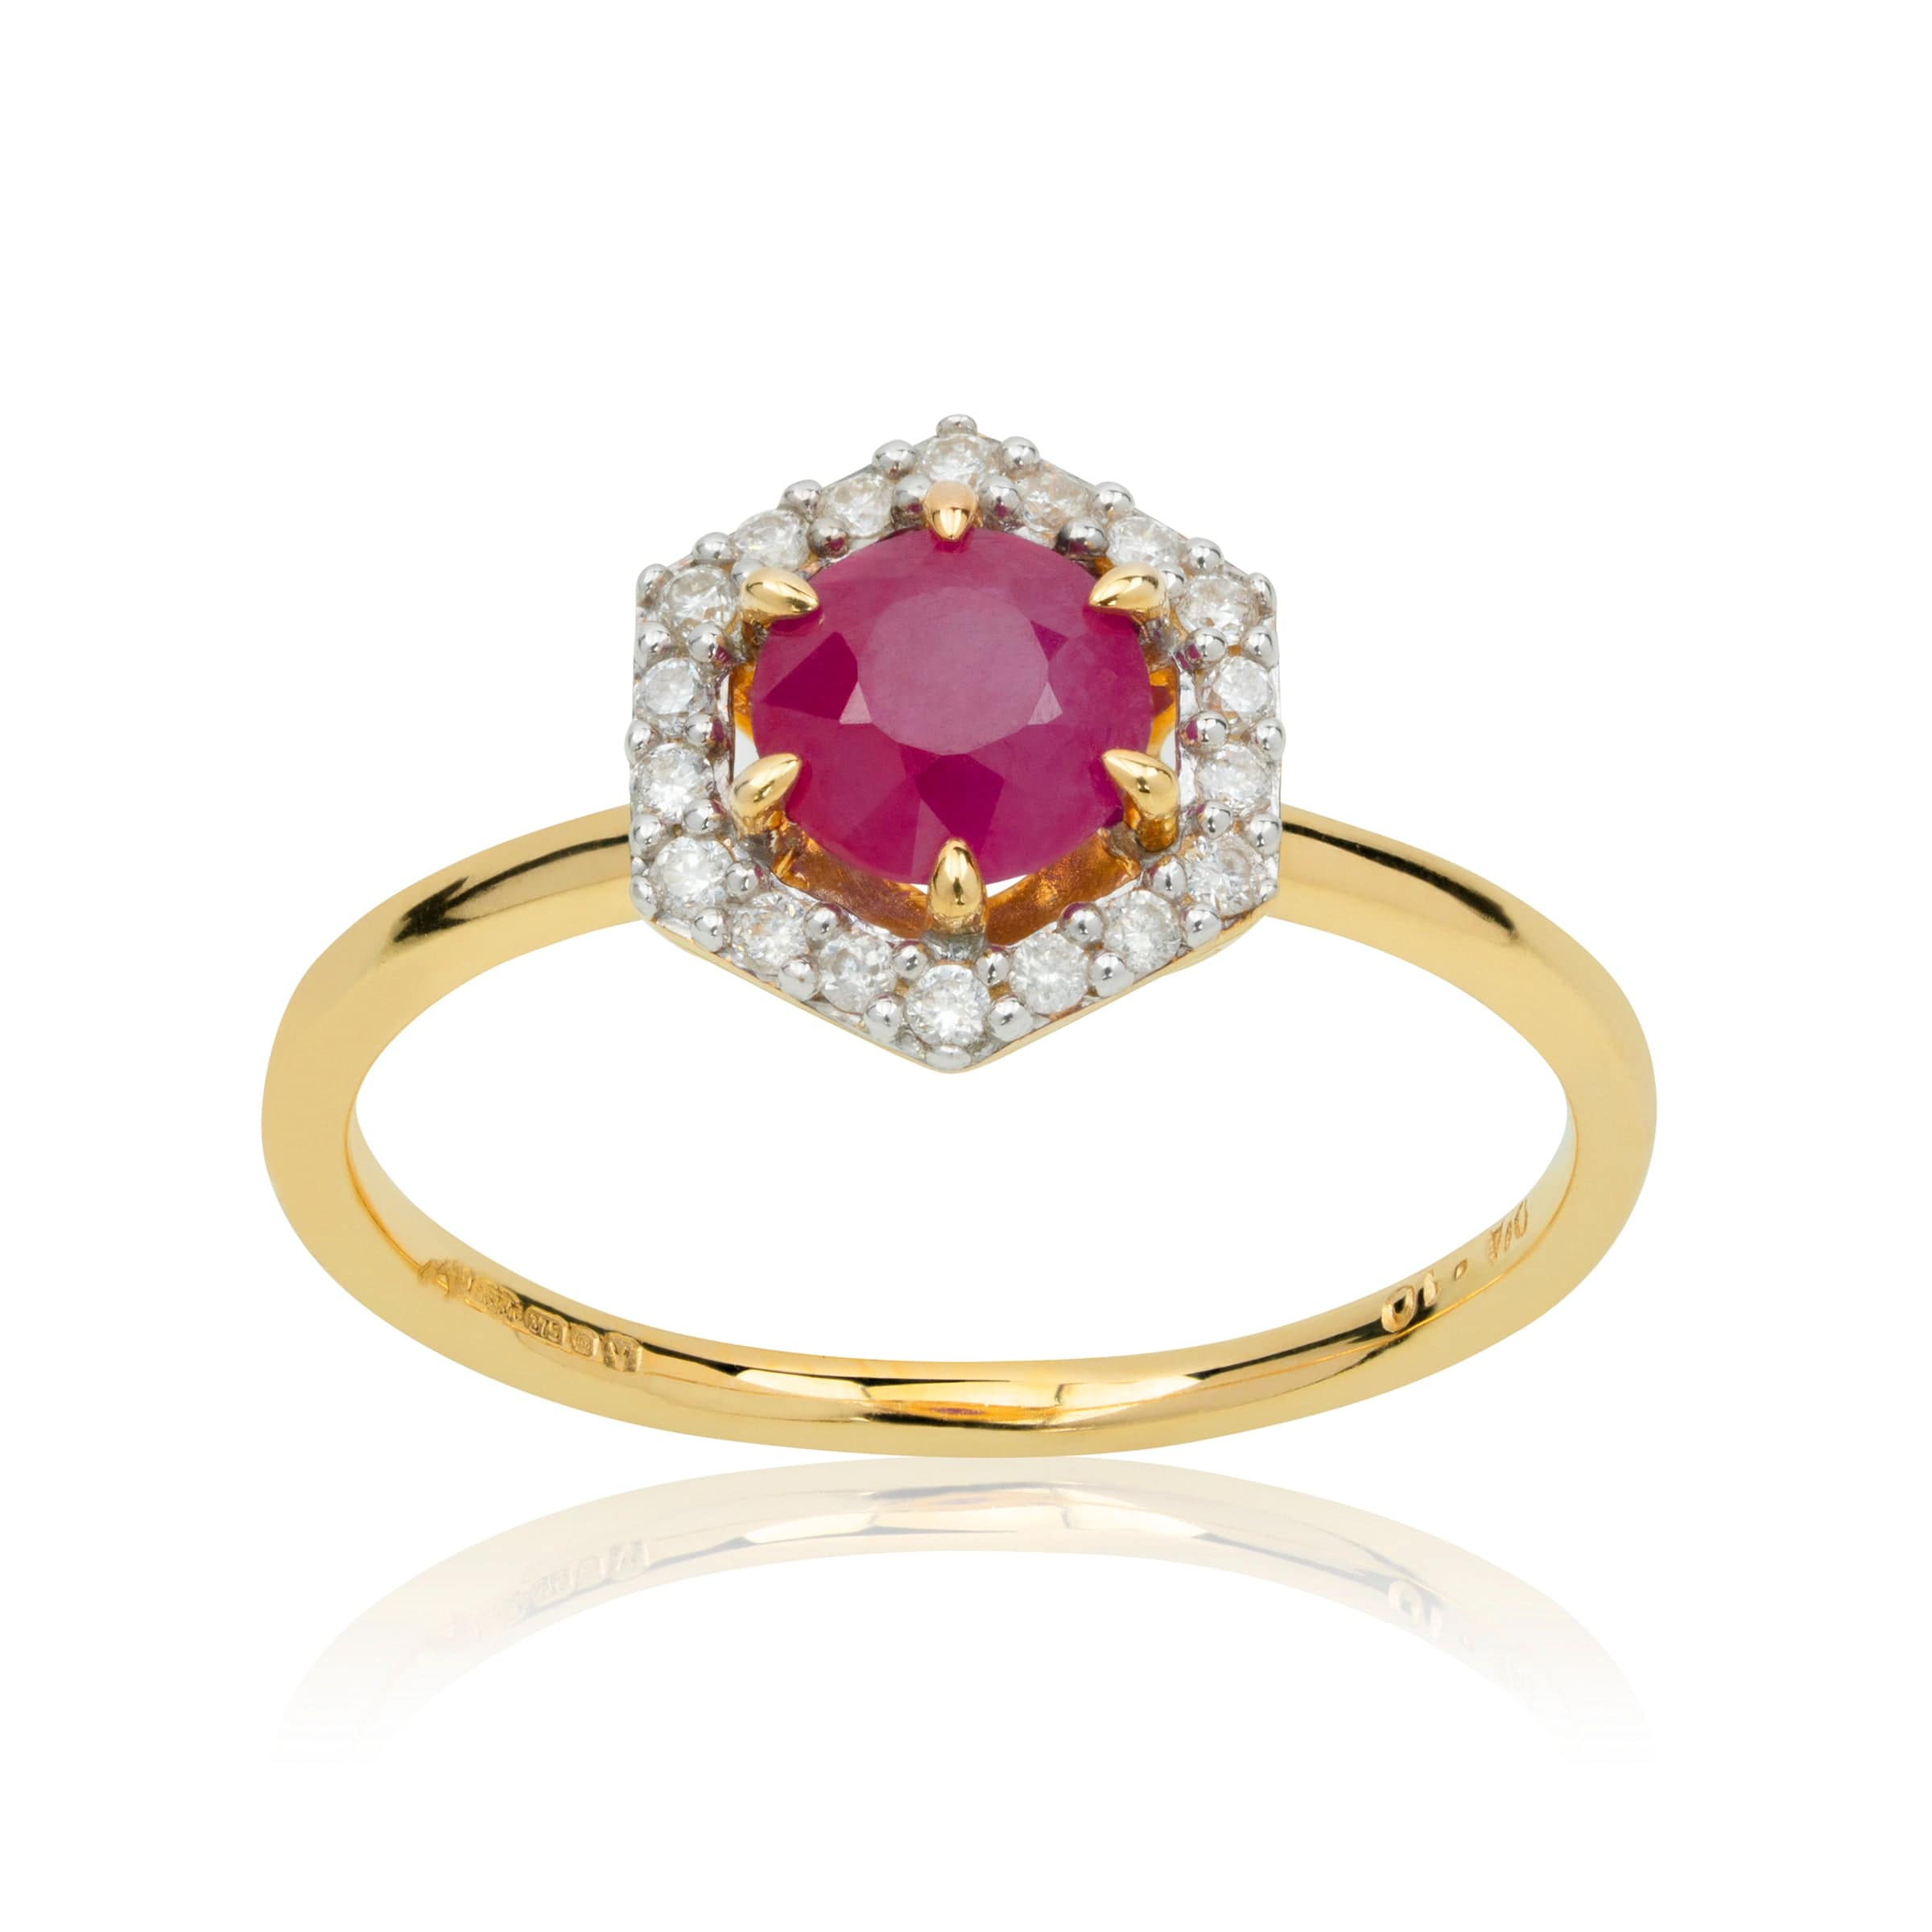 133R94860318 18ct Yellow Gold 0.92ct Ruby & Diamond Halo Engagement Ring 2